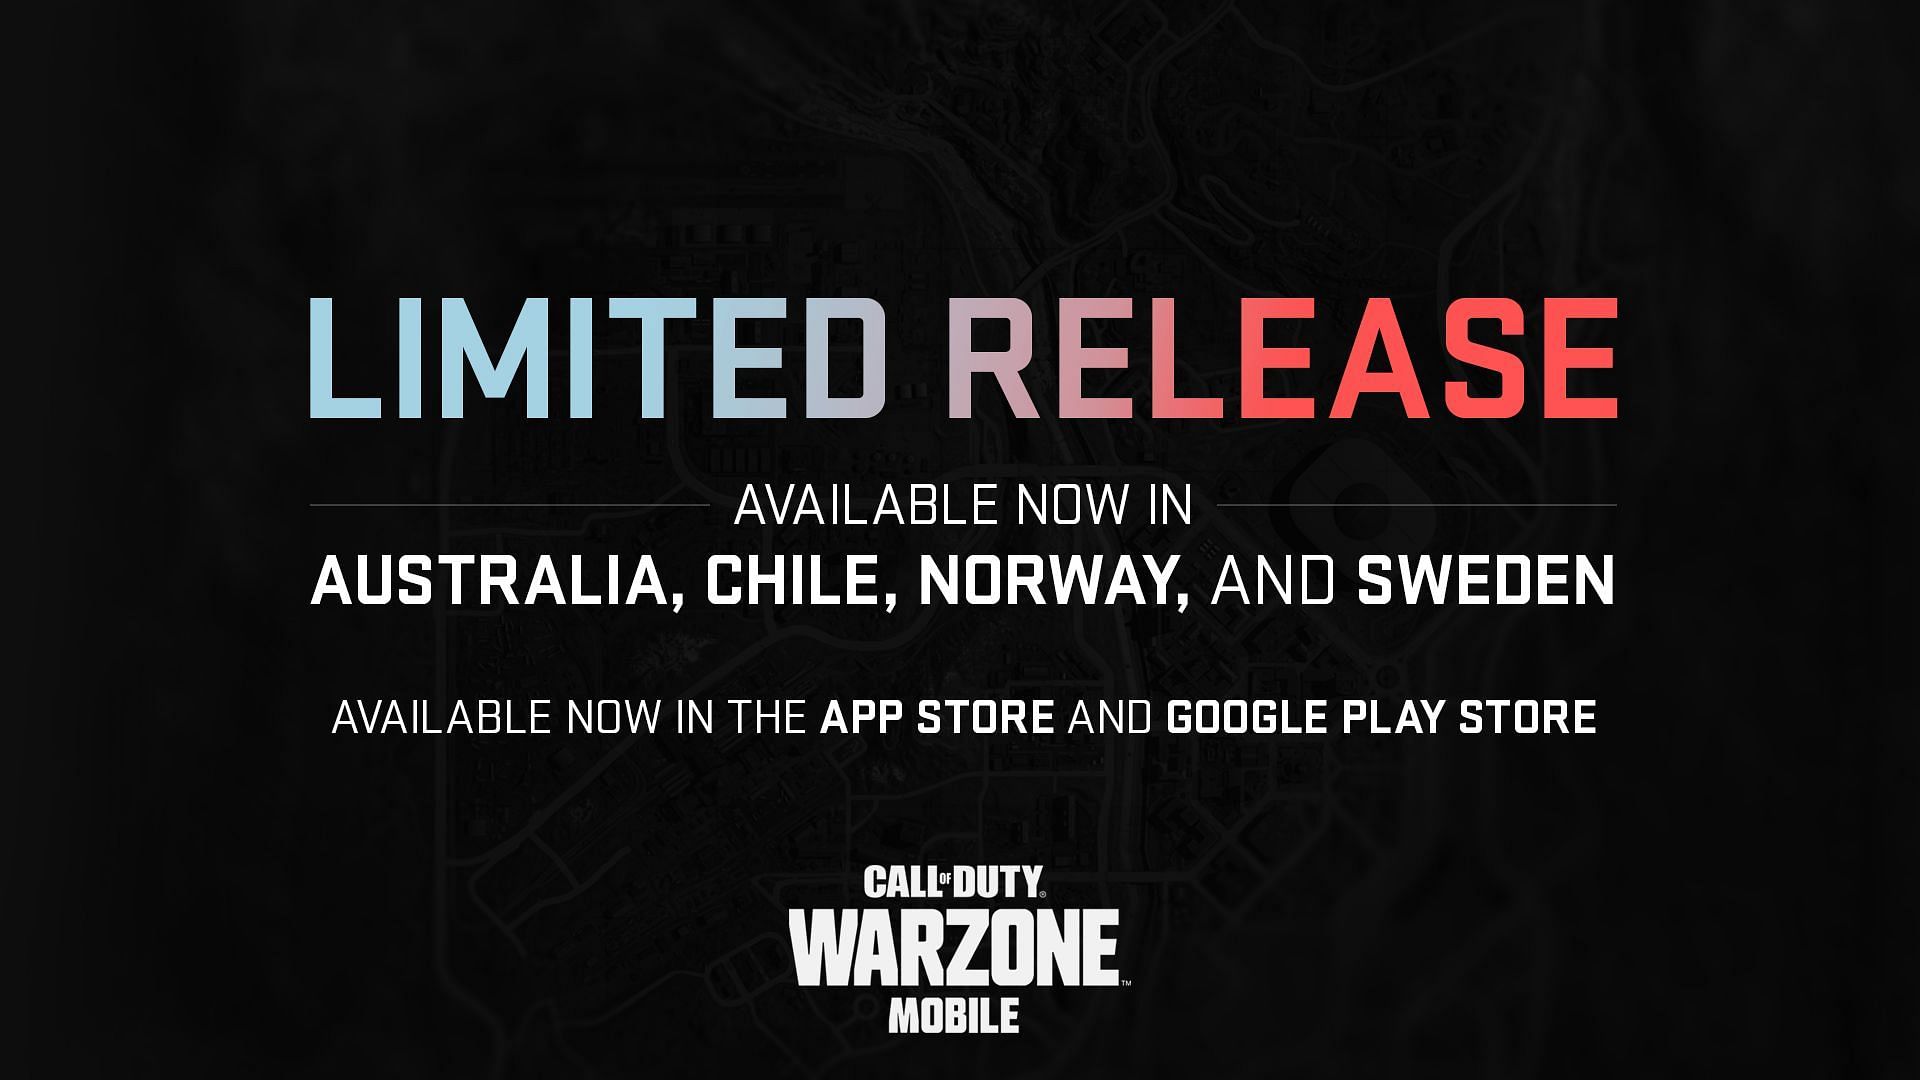 Call of Duty: Advanced Warfare Companion App Now Available in Google Play